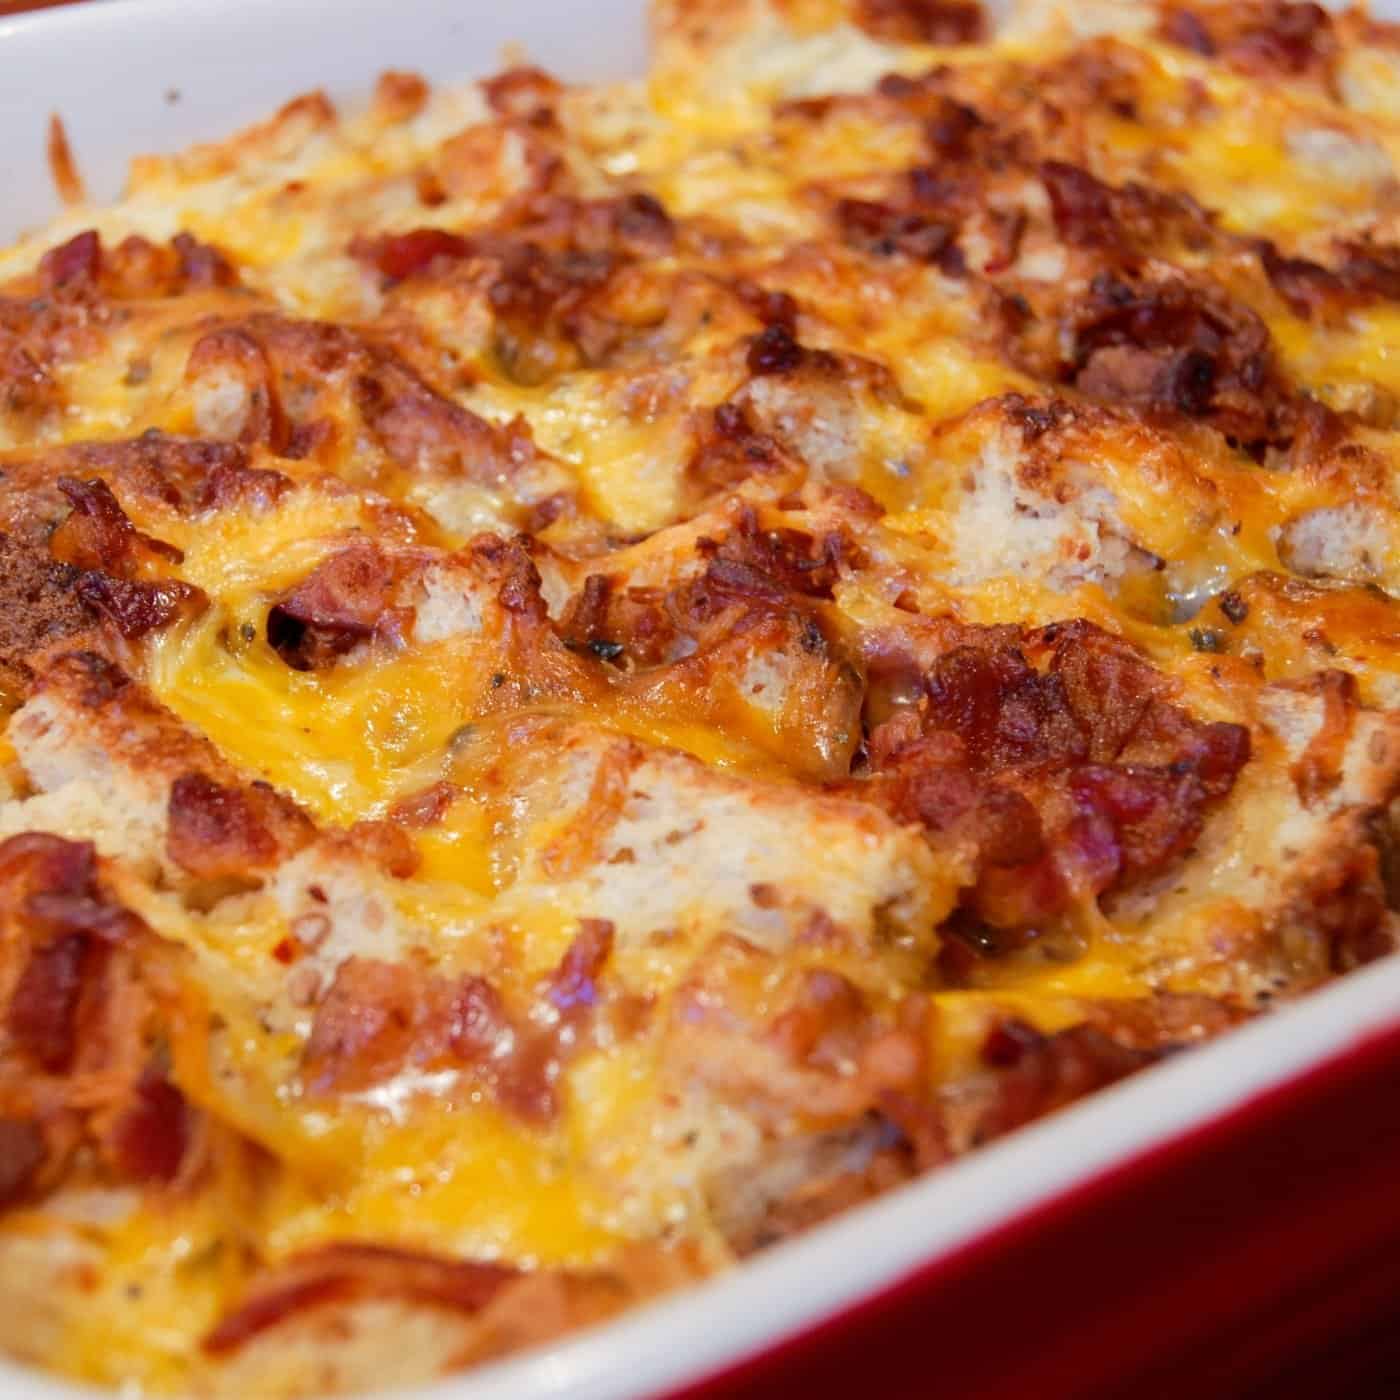 Breakfast casserole with bacon egg and cheese on top